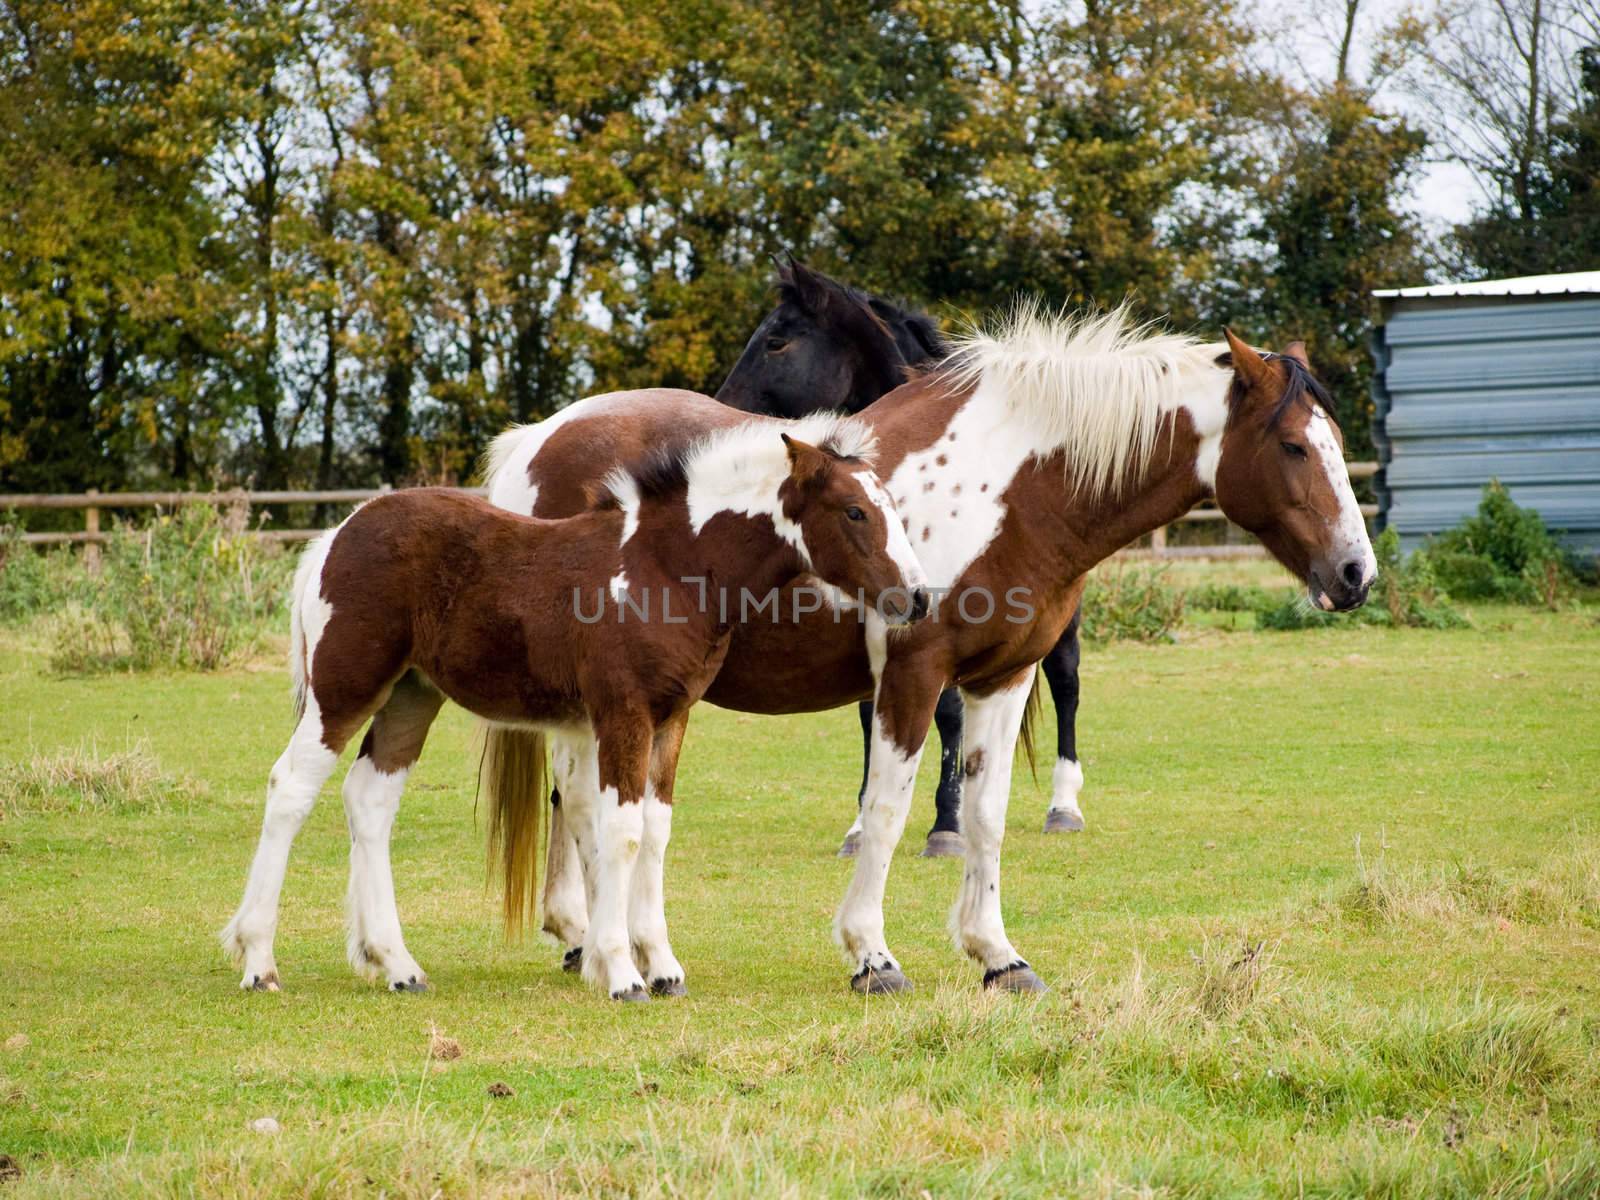 Foal and her mother standing in a grassy paddock